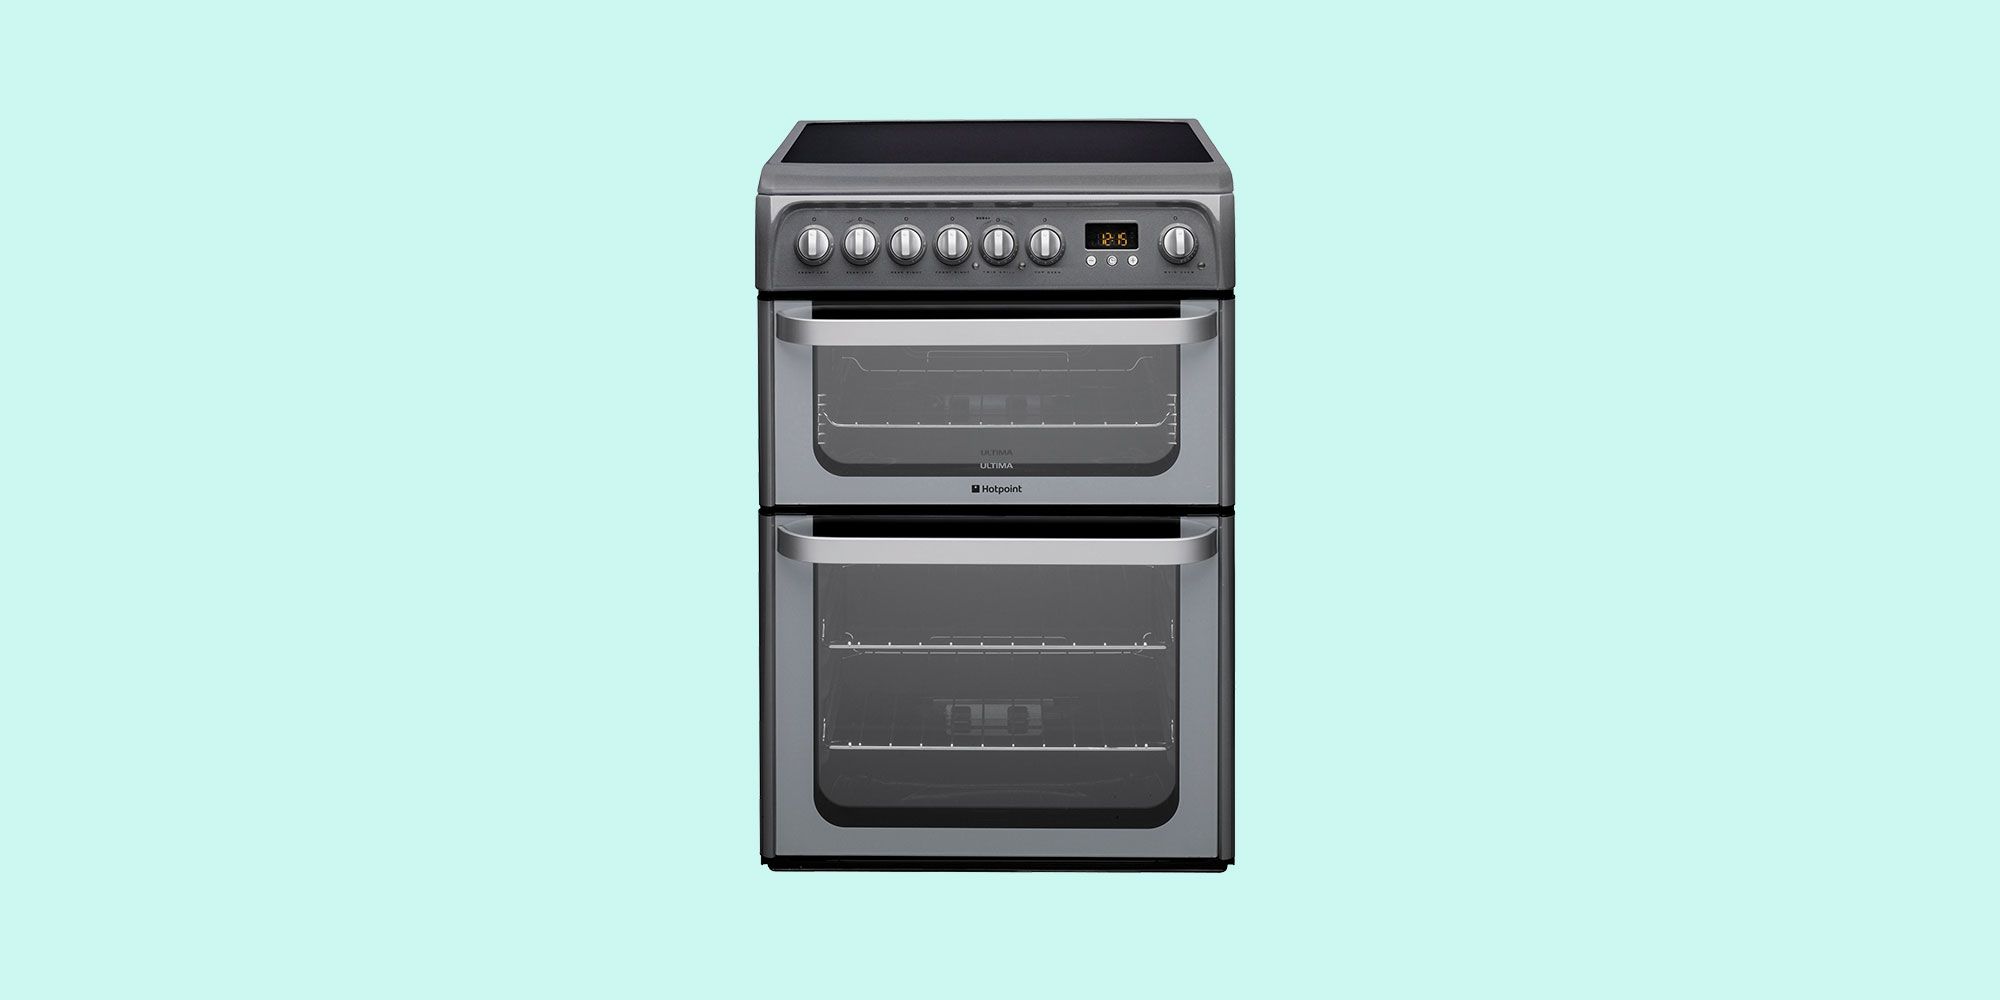 electric cookers 550mm wide freestanding